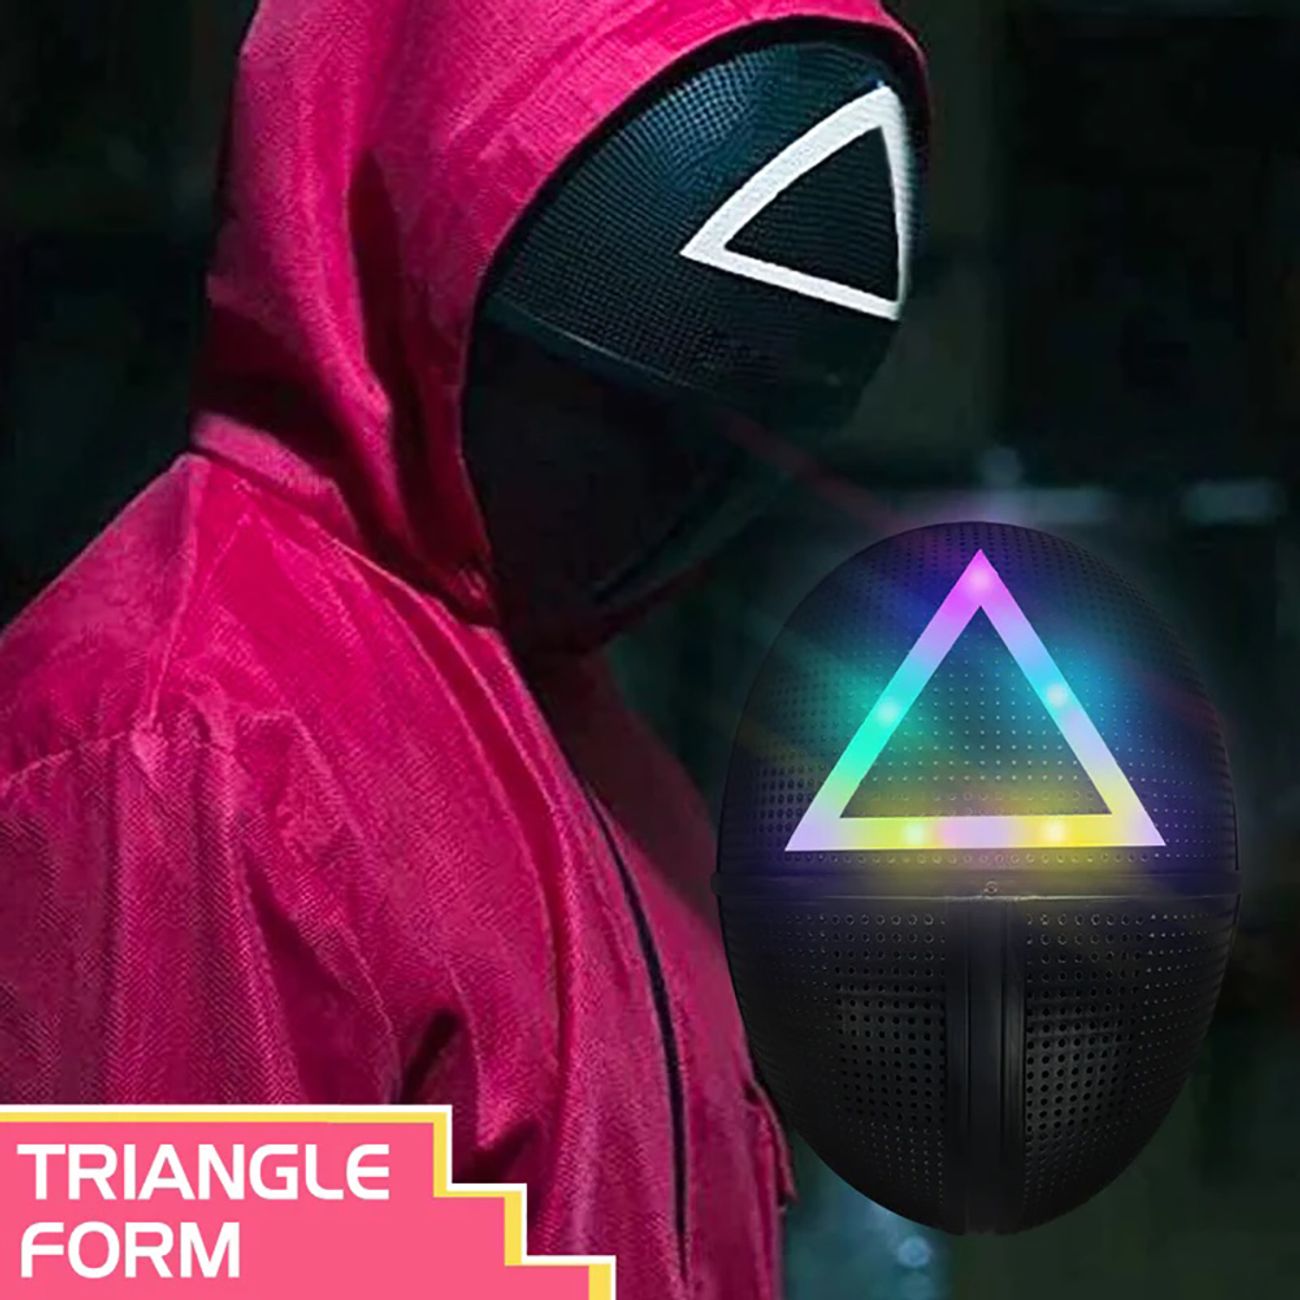 squid-game-triangle-led-mask-87617-4